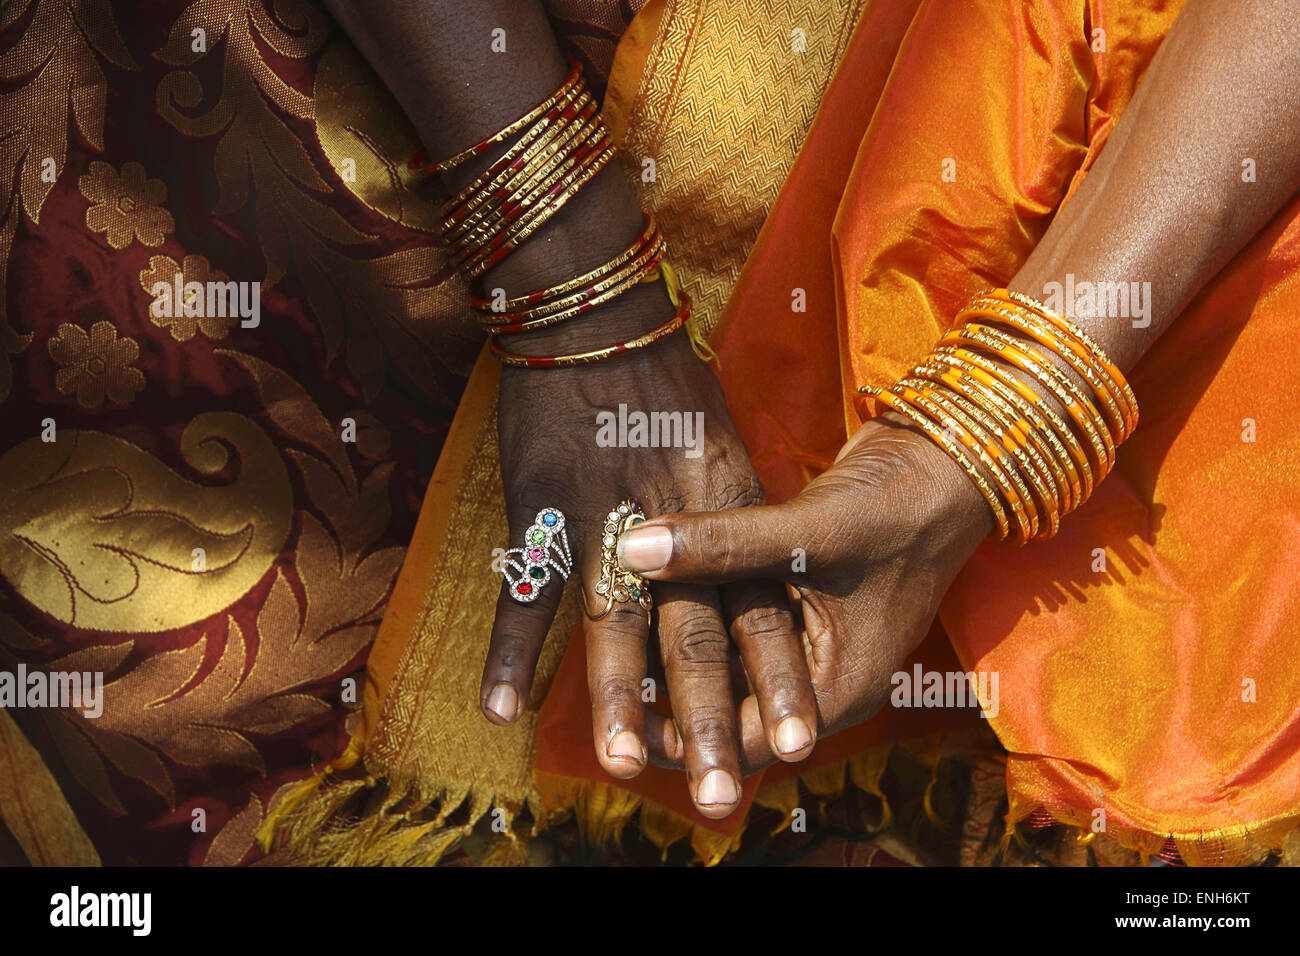 Villupuram, India. 05th May, 2015. Thousands of transgenders get married with Lord Aravan at Koothandavar temple in Koovagam festival on Tuesday. Transgenders gathered for 18 days in the month of April-May to observe the festival in Koovagam village, Villupuram district of Tamilnadu. © Shashi Sharma/Pacific Press/Alamy Live News Stock Photo